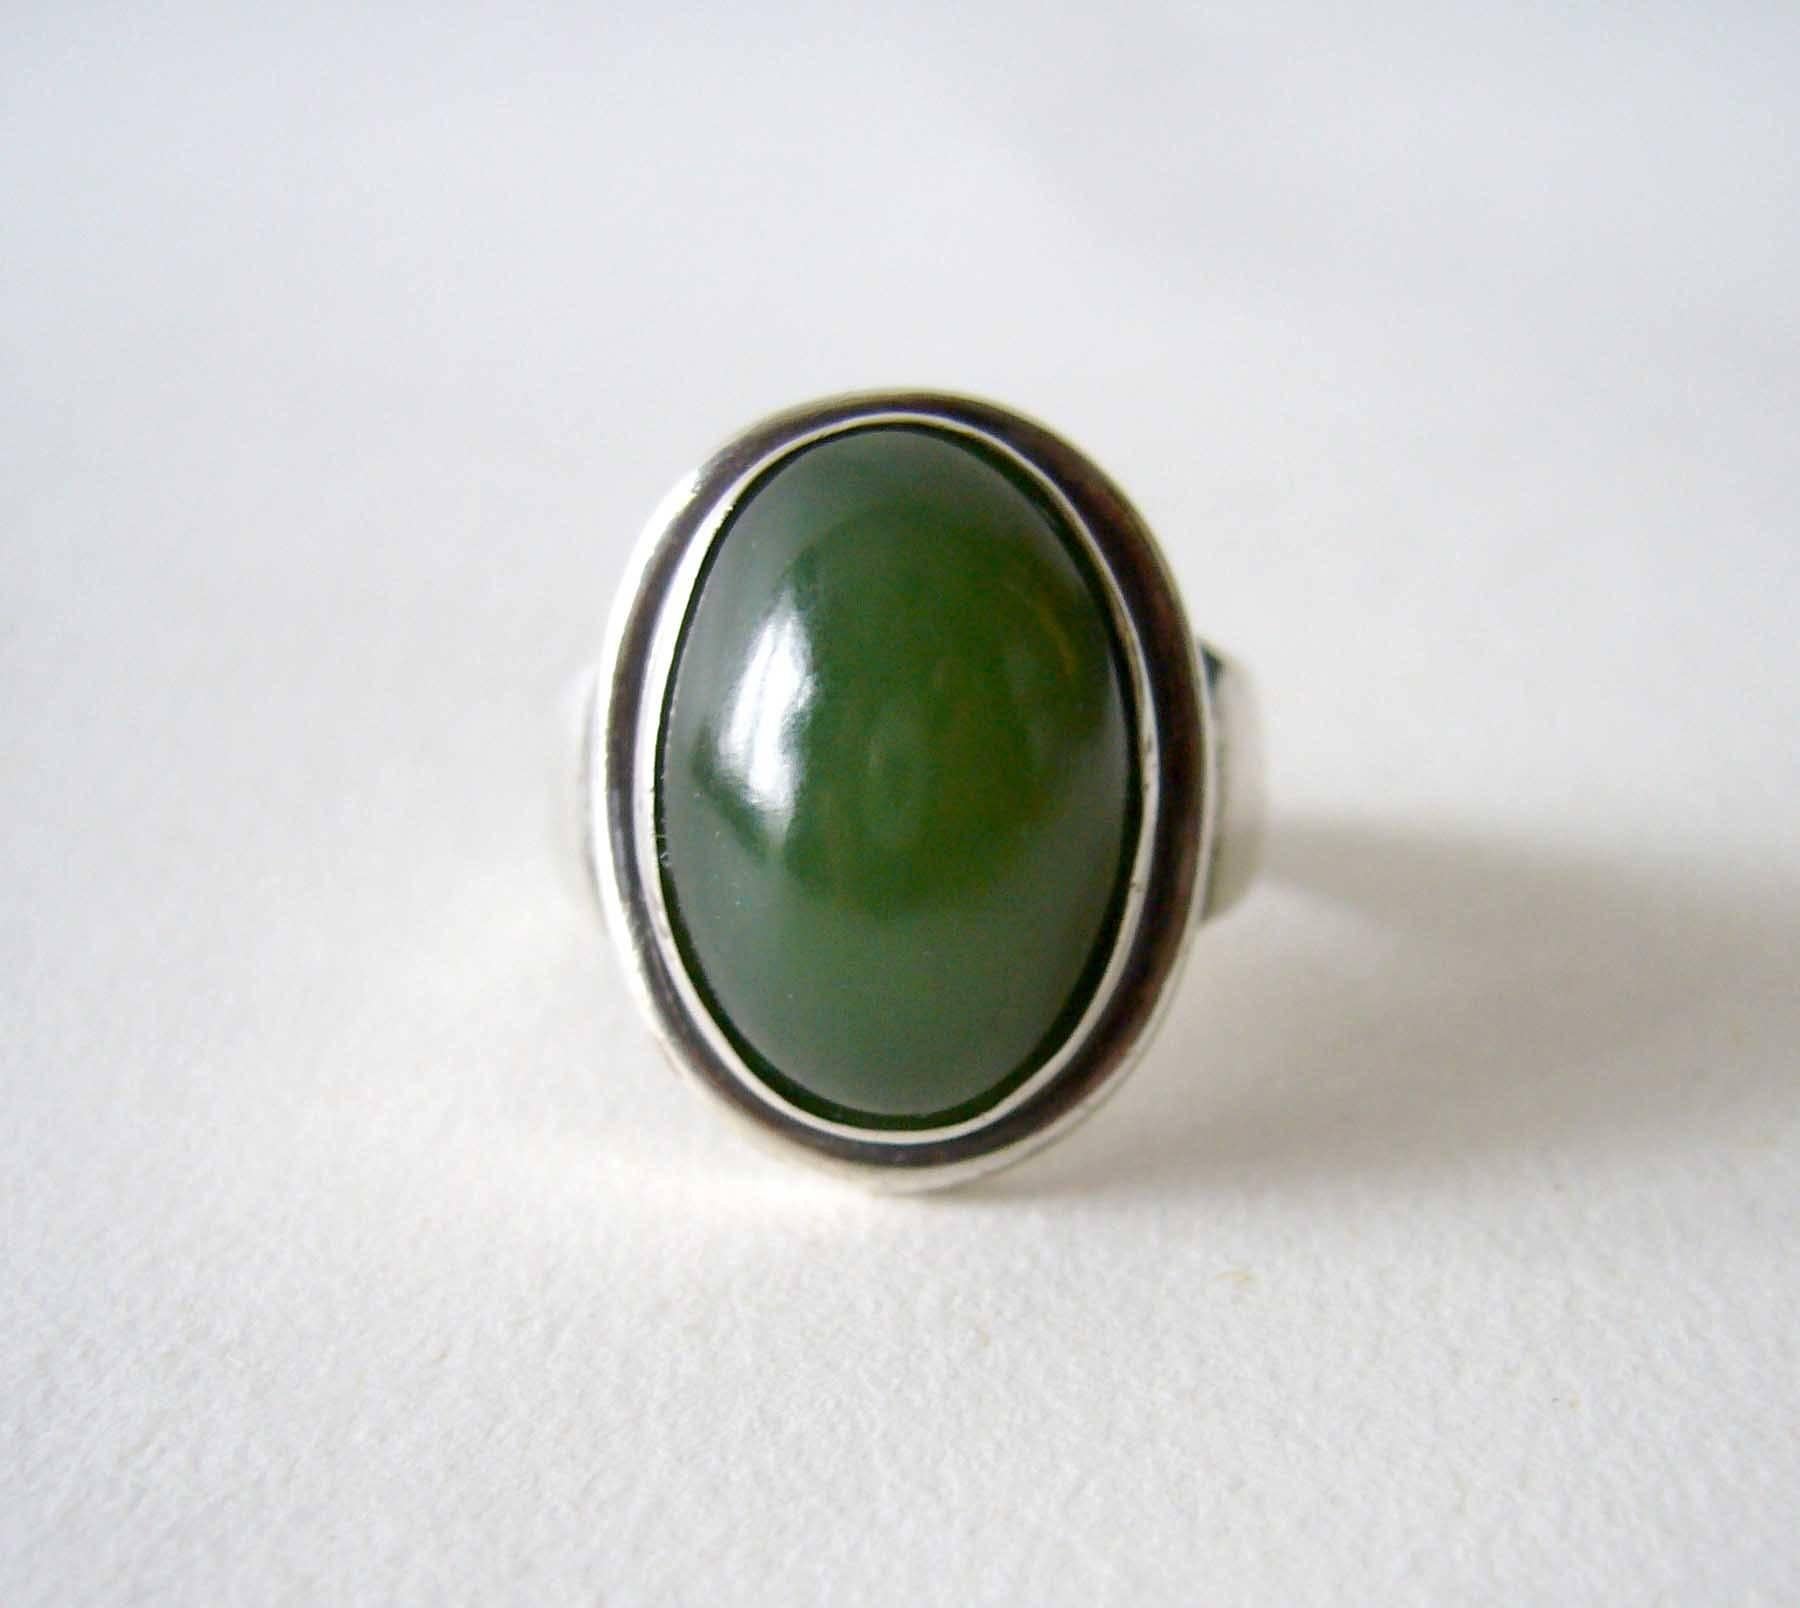 Sterling silver and jade ring designed by Harald Neilsen for Georg Jensen of Denmark.  Jade is of the nephrite variety and in very good condition.  Ring is a finger size 9.5 to 9.75 and is signed with oval mark of Georg Jensen, Denmark, Sterling,